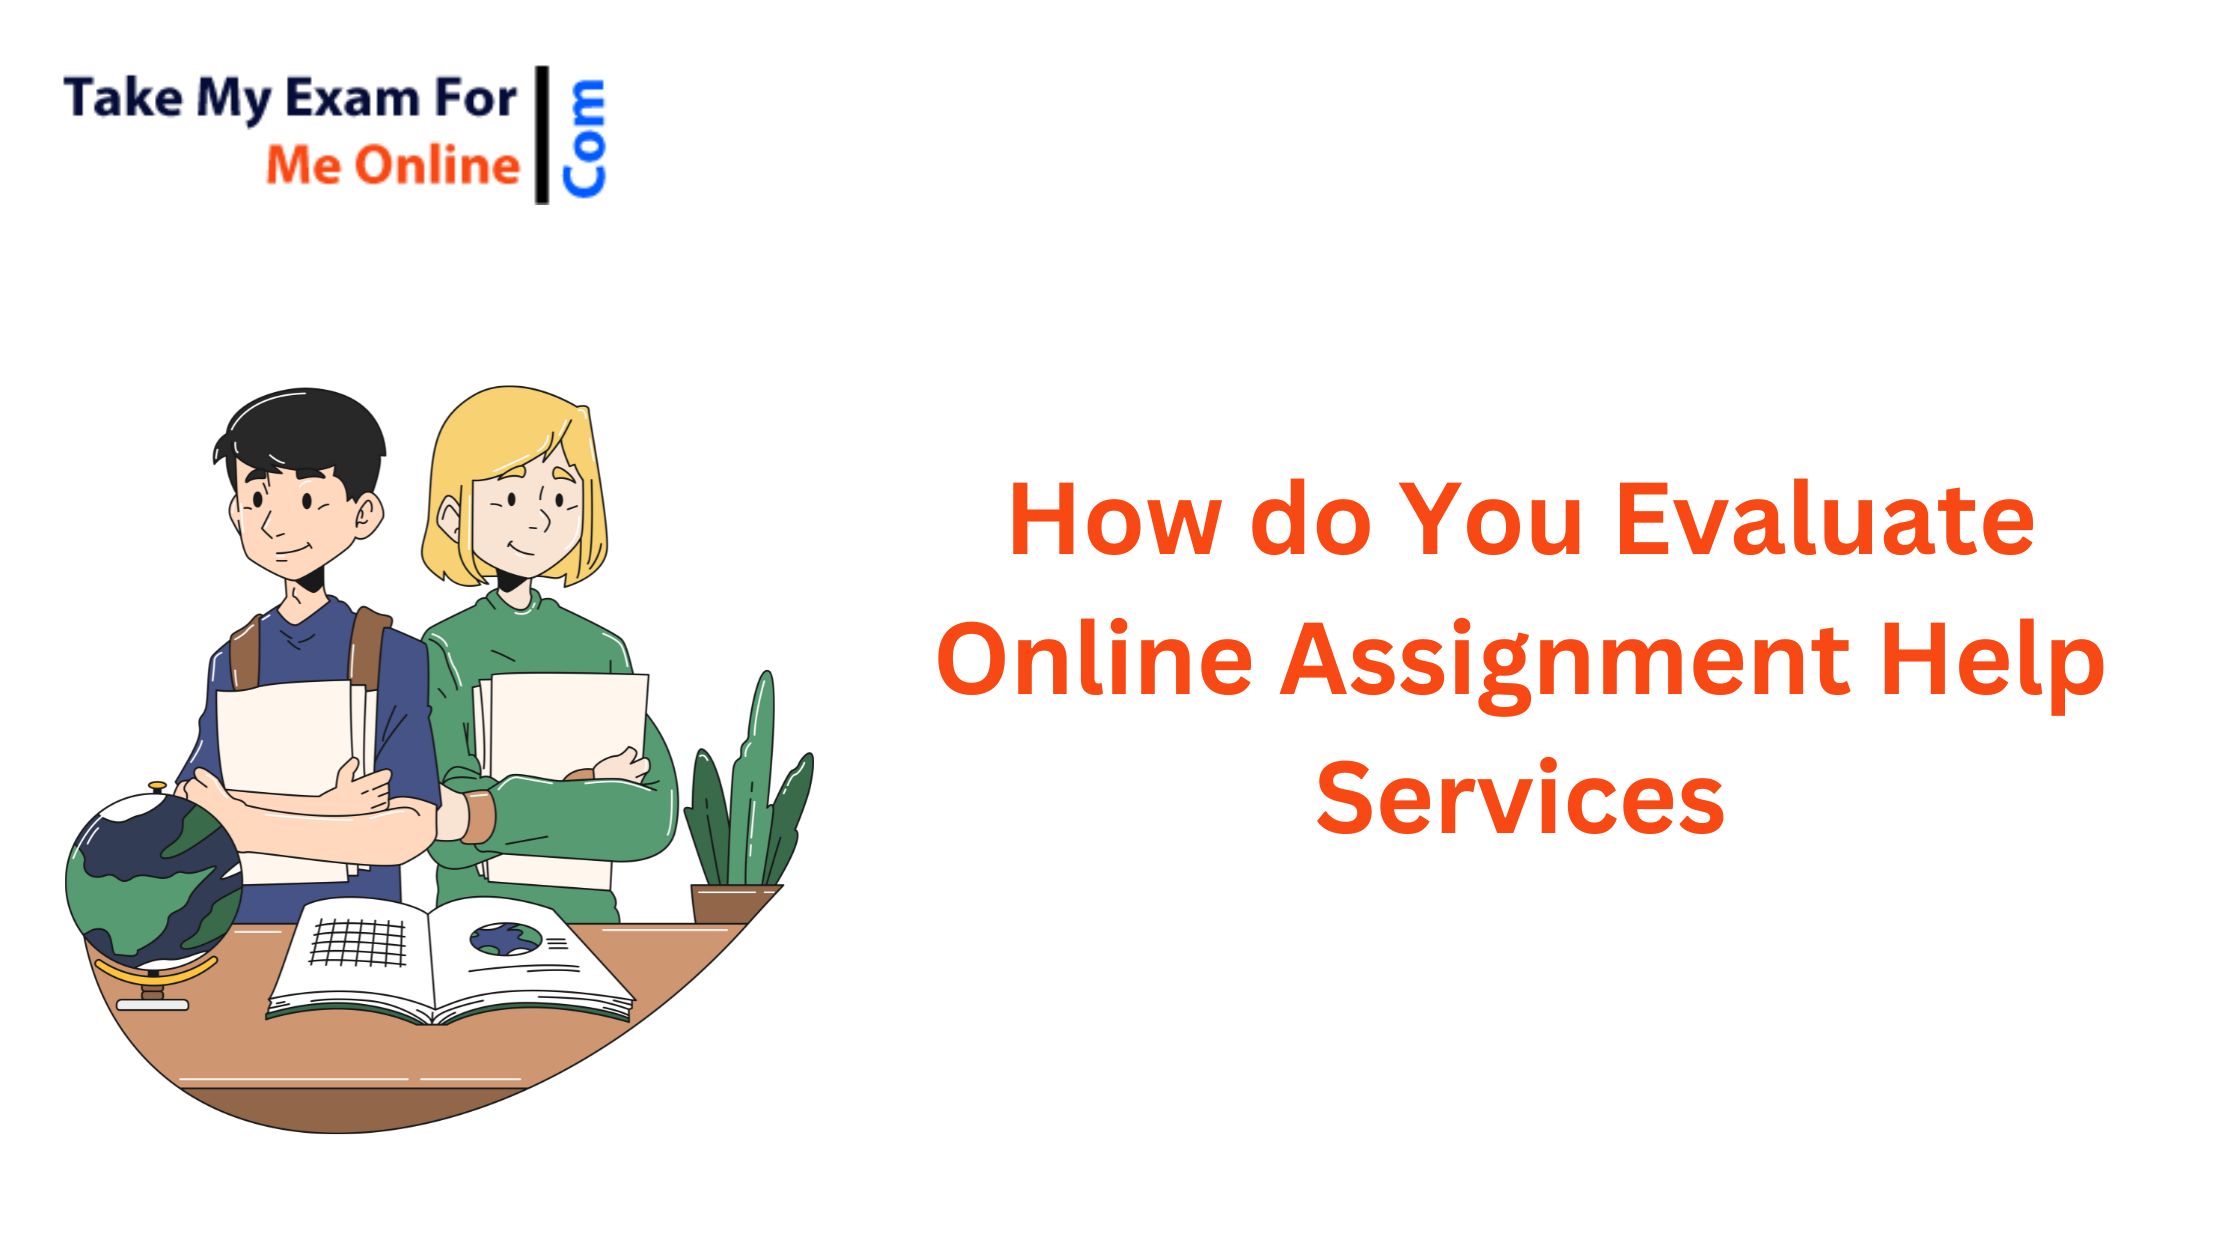 How do you evaluate online assignment help services